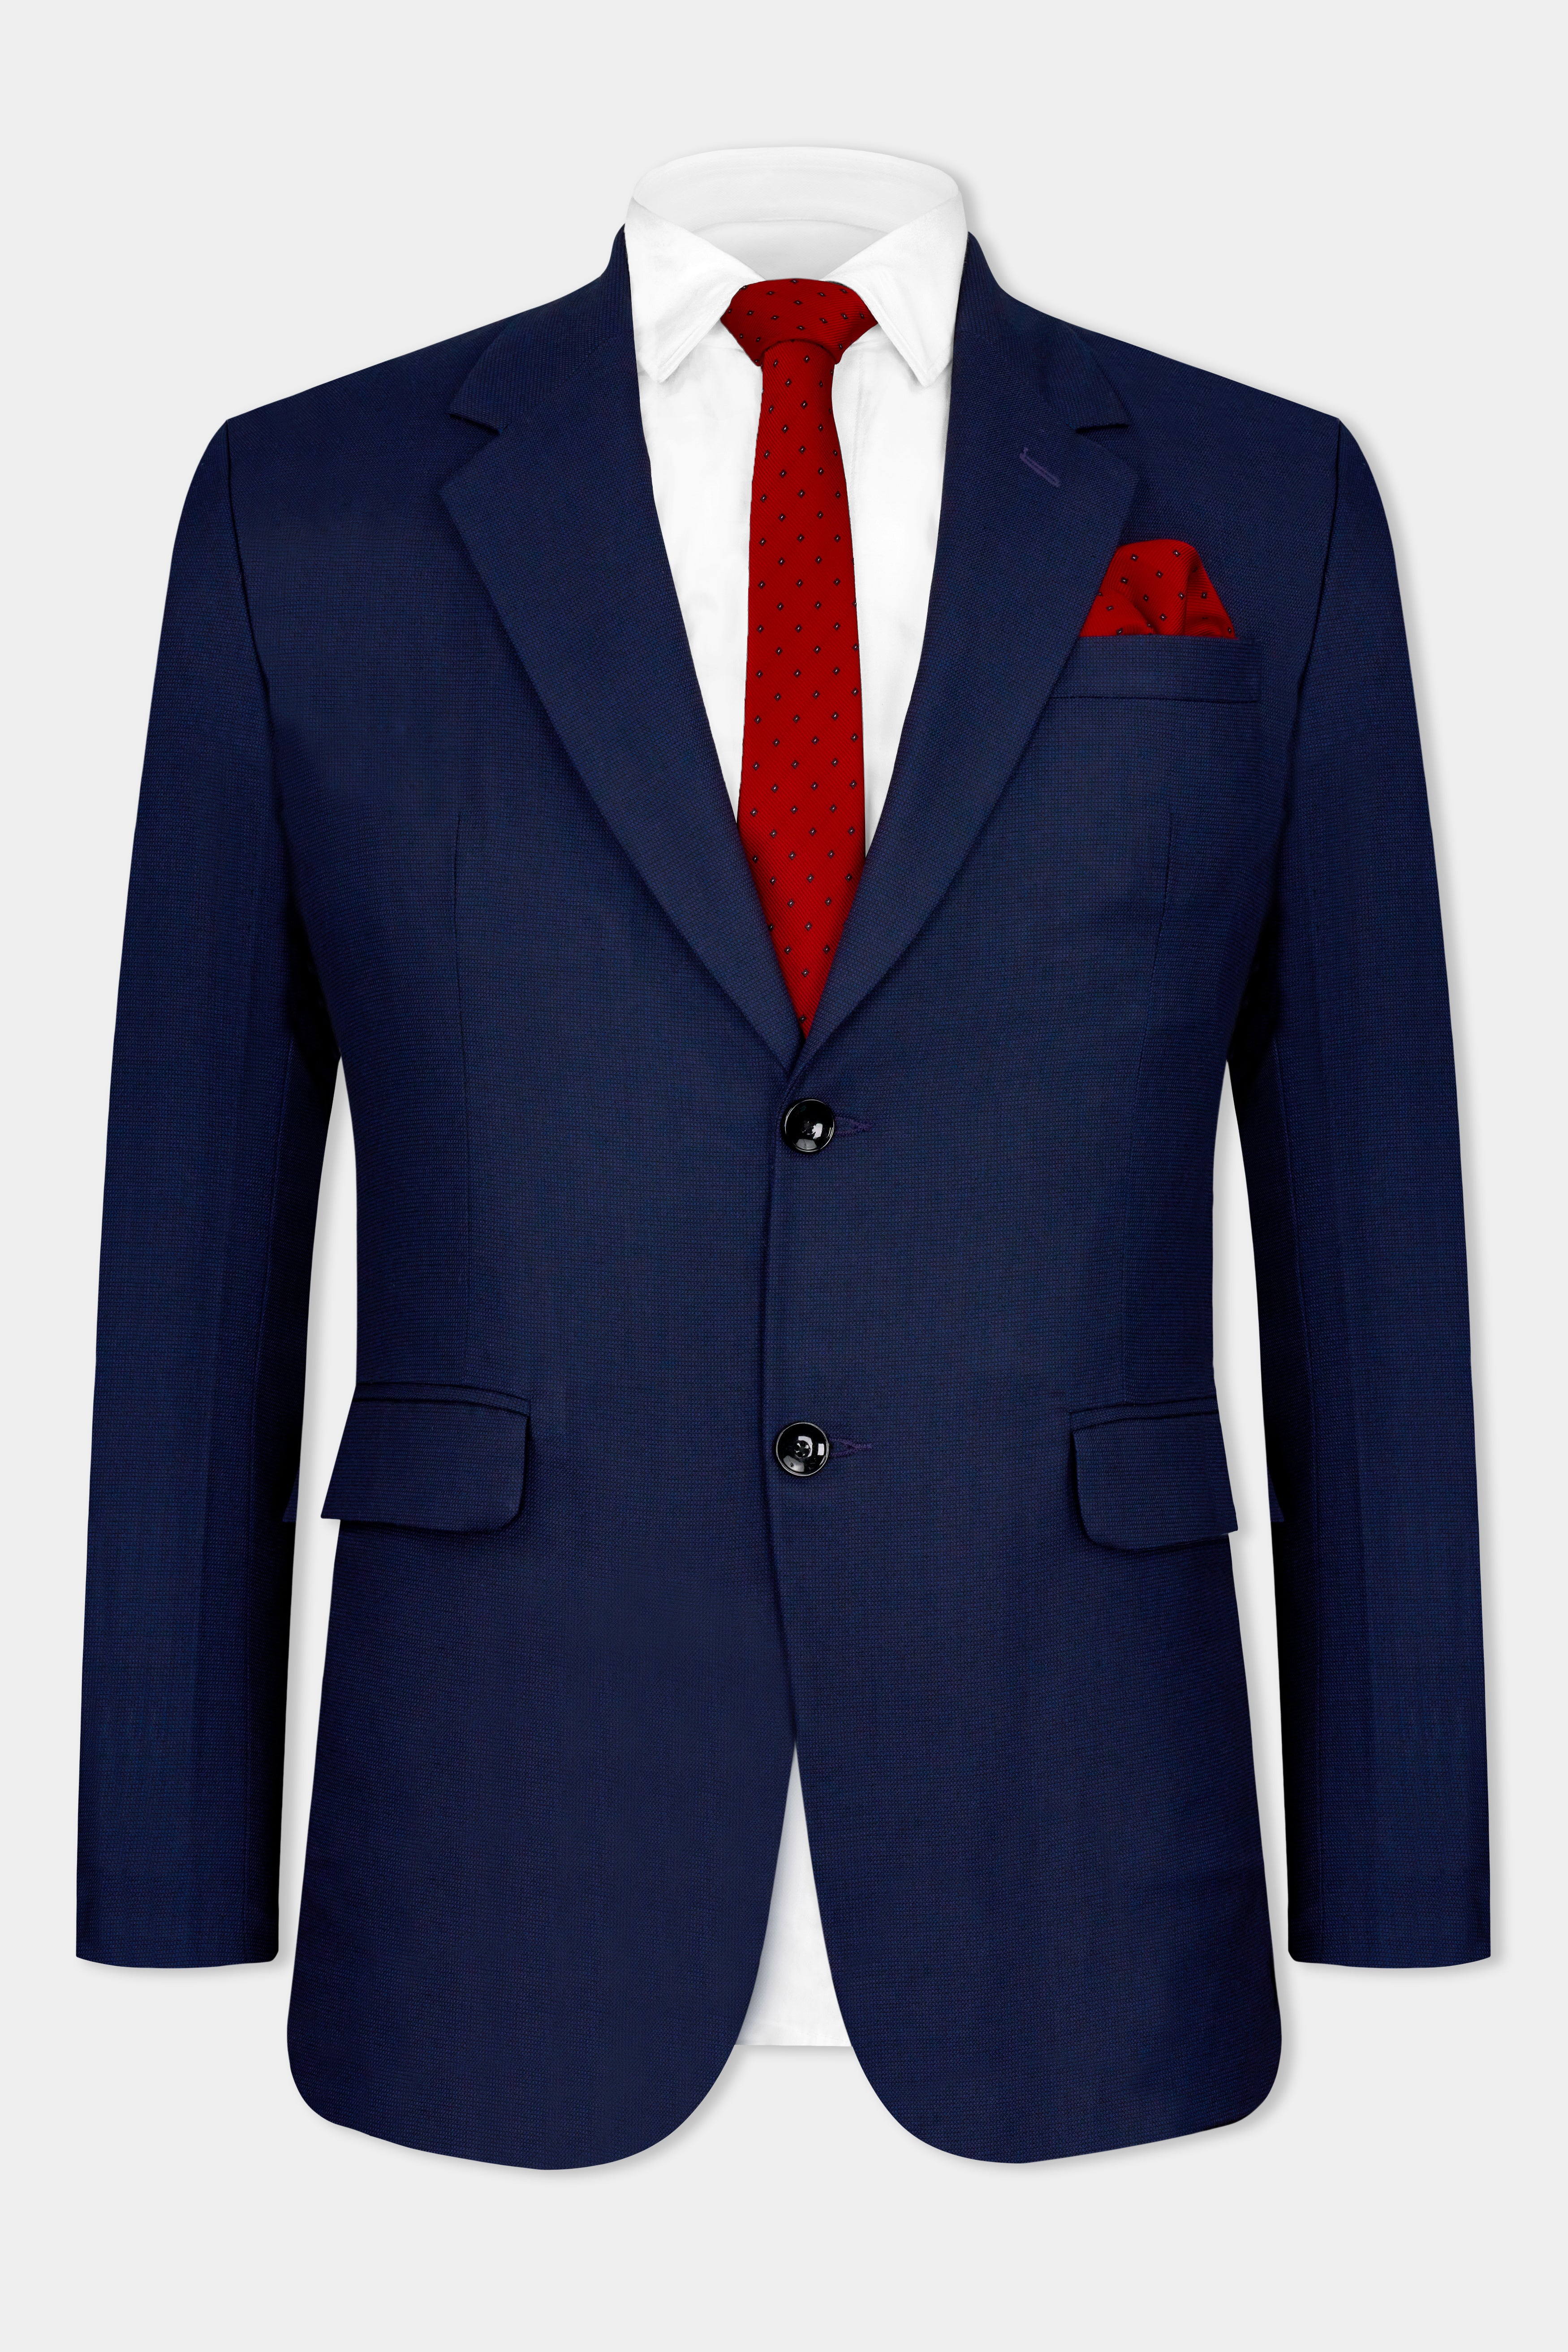 Midnight Navy Blue Wool Rich Single Breasted Blazer BL2753-SB-36, BL2753-SB-38, BL2753-SB-40, BL2753-SB-42, BL2753-SB-44, BL2753-SB-46, BL2753-SB-48, BL2753-SB-50, BL2753-SB-52, BL2753-SB-54, BL2753-SB-56, BL2753-SB-58, BL2753-SB-60